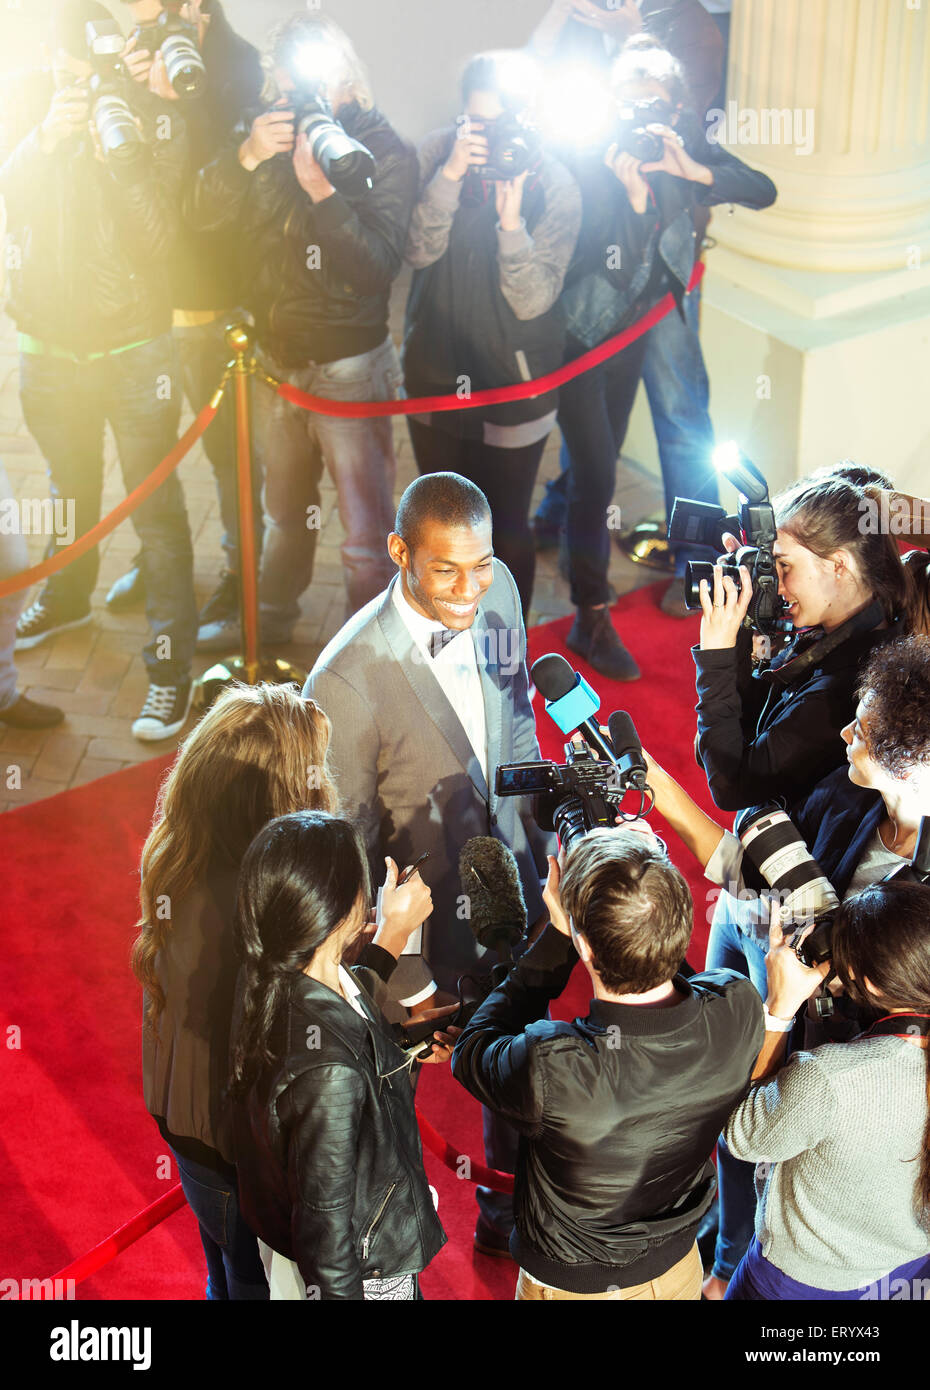 Celebrity being interviewed and photographed by paparazzi photographer at red carpet event Stock Photo